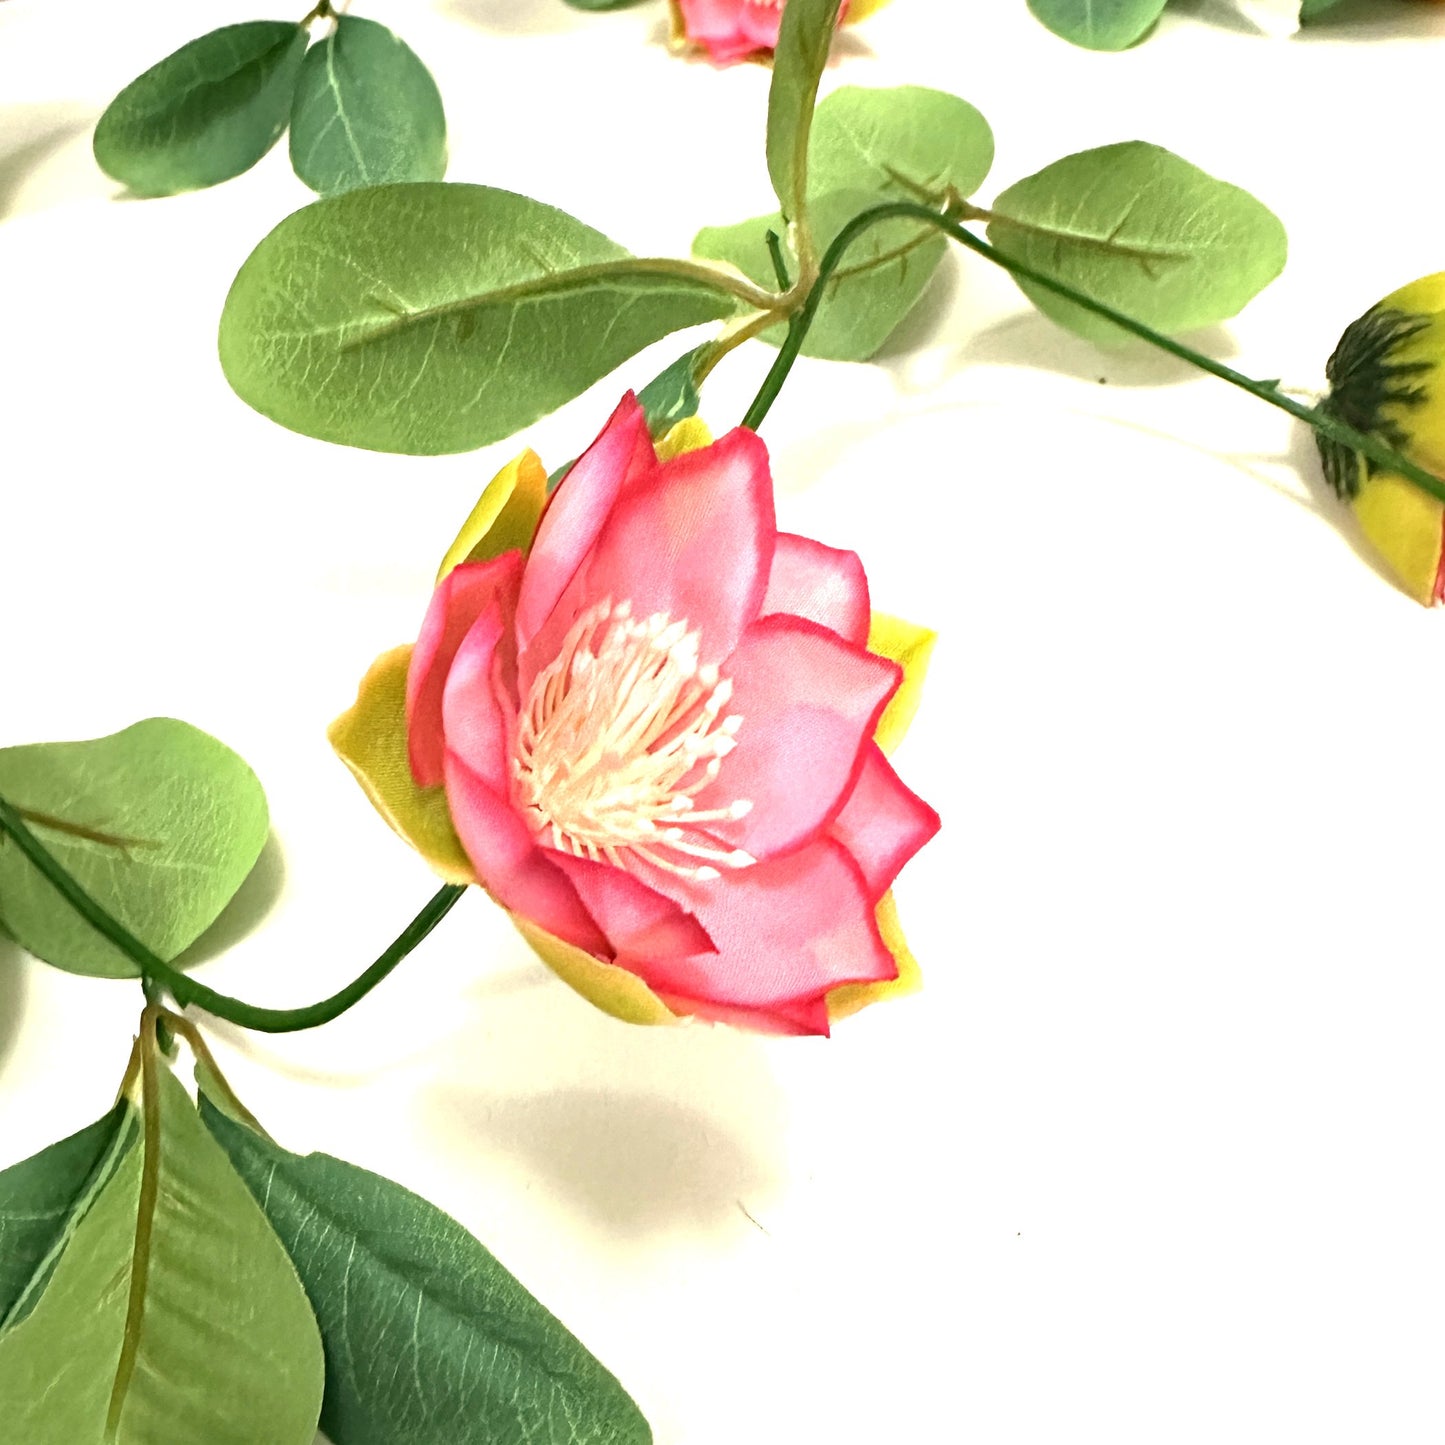 Artificial Water Lily Garland